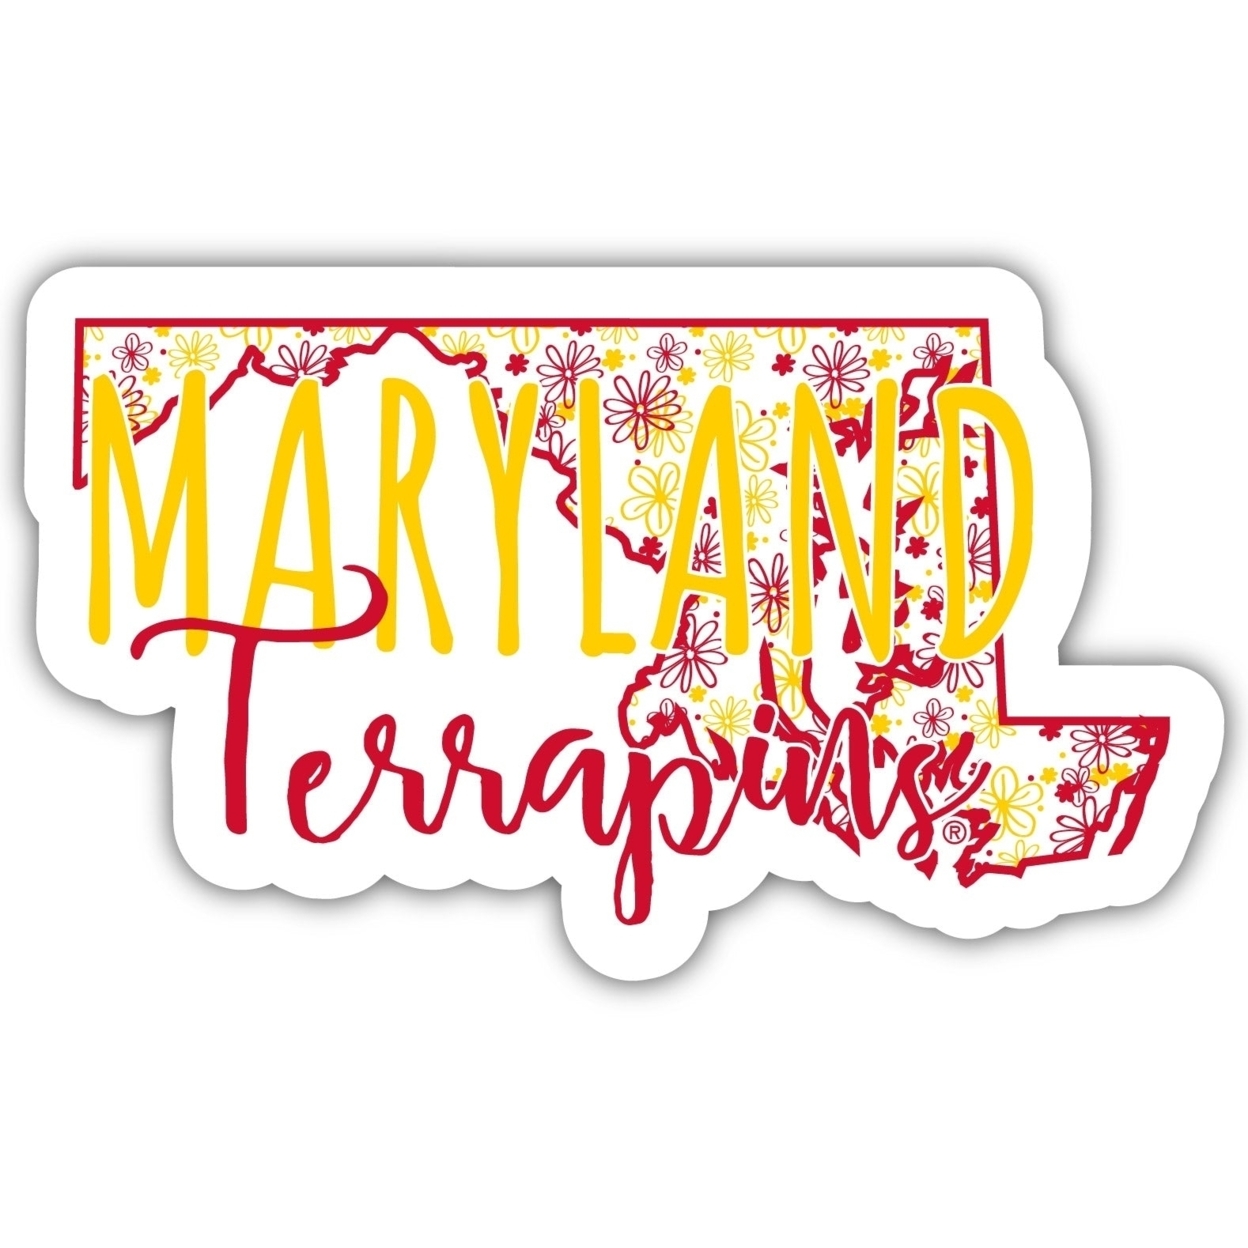 Maryland Terrapins Floral State Die Cut Decal 2-Inch